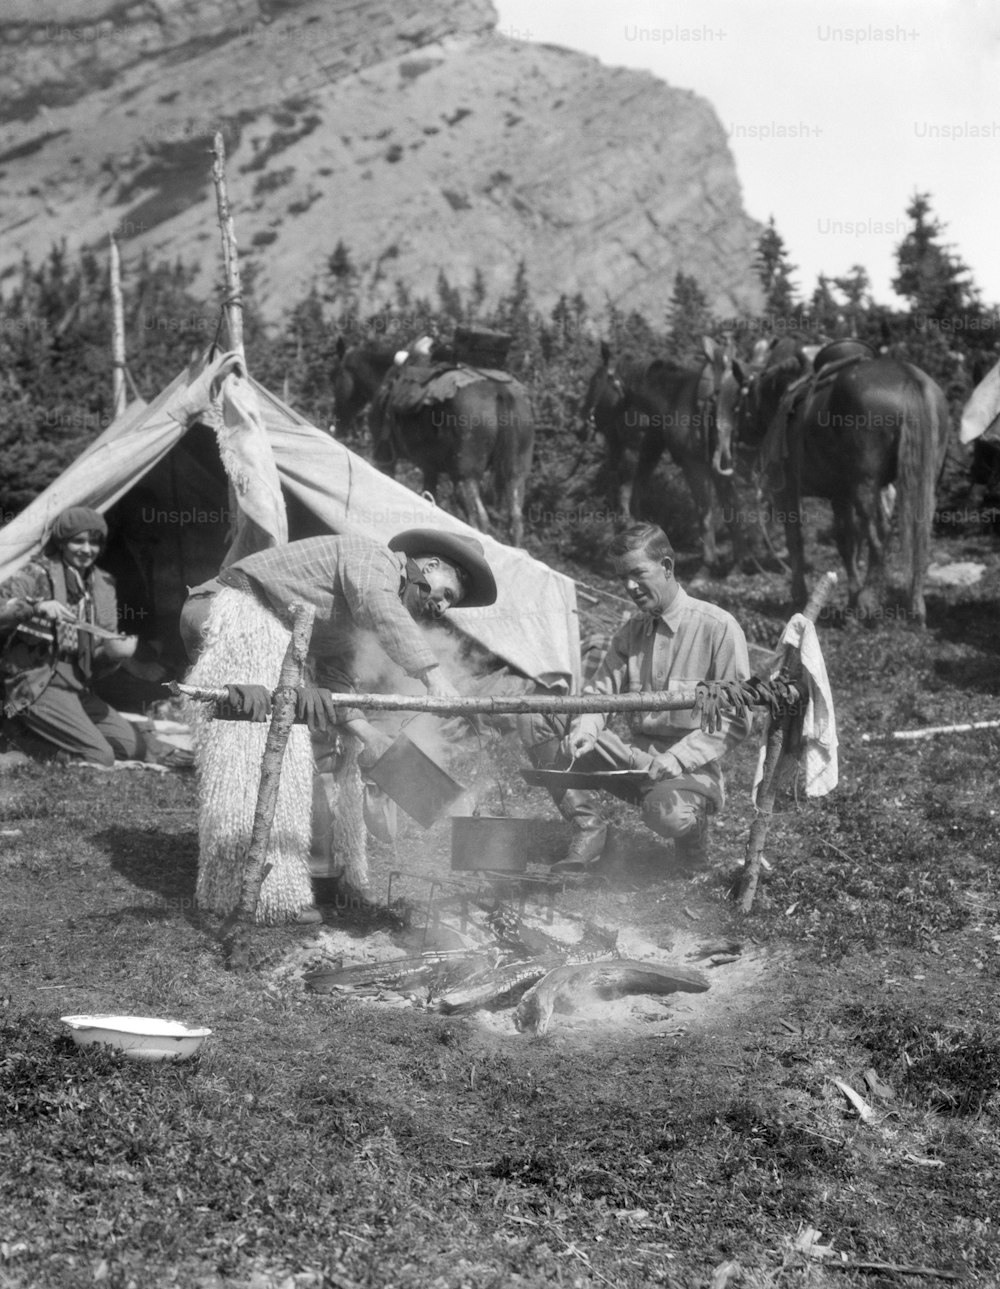 UNITED STATES - CIRCA 1930s:  Cowboy campers observe horseman cooking over fire.